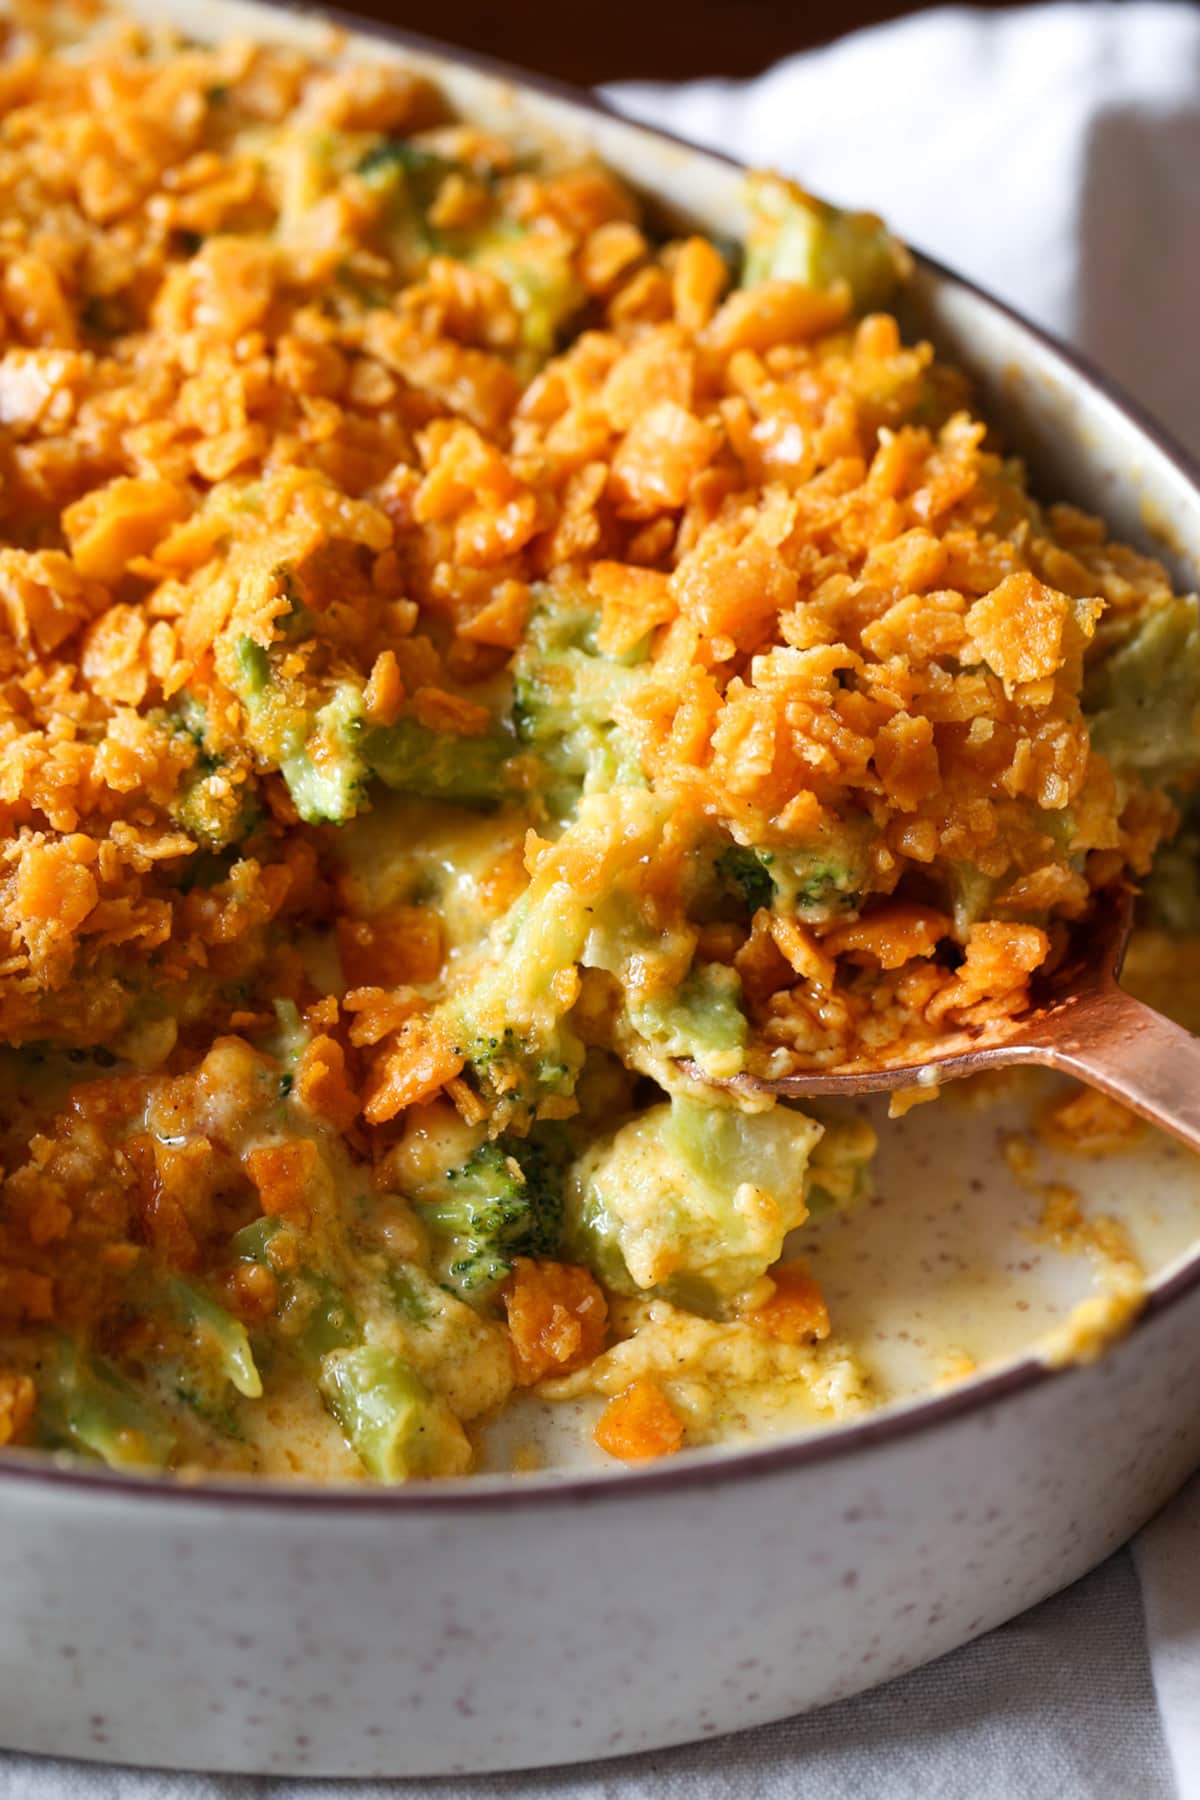 Scooping out broccoli casserole in a baking dish